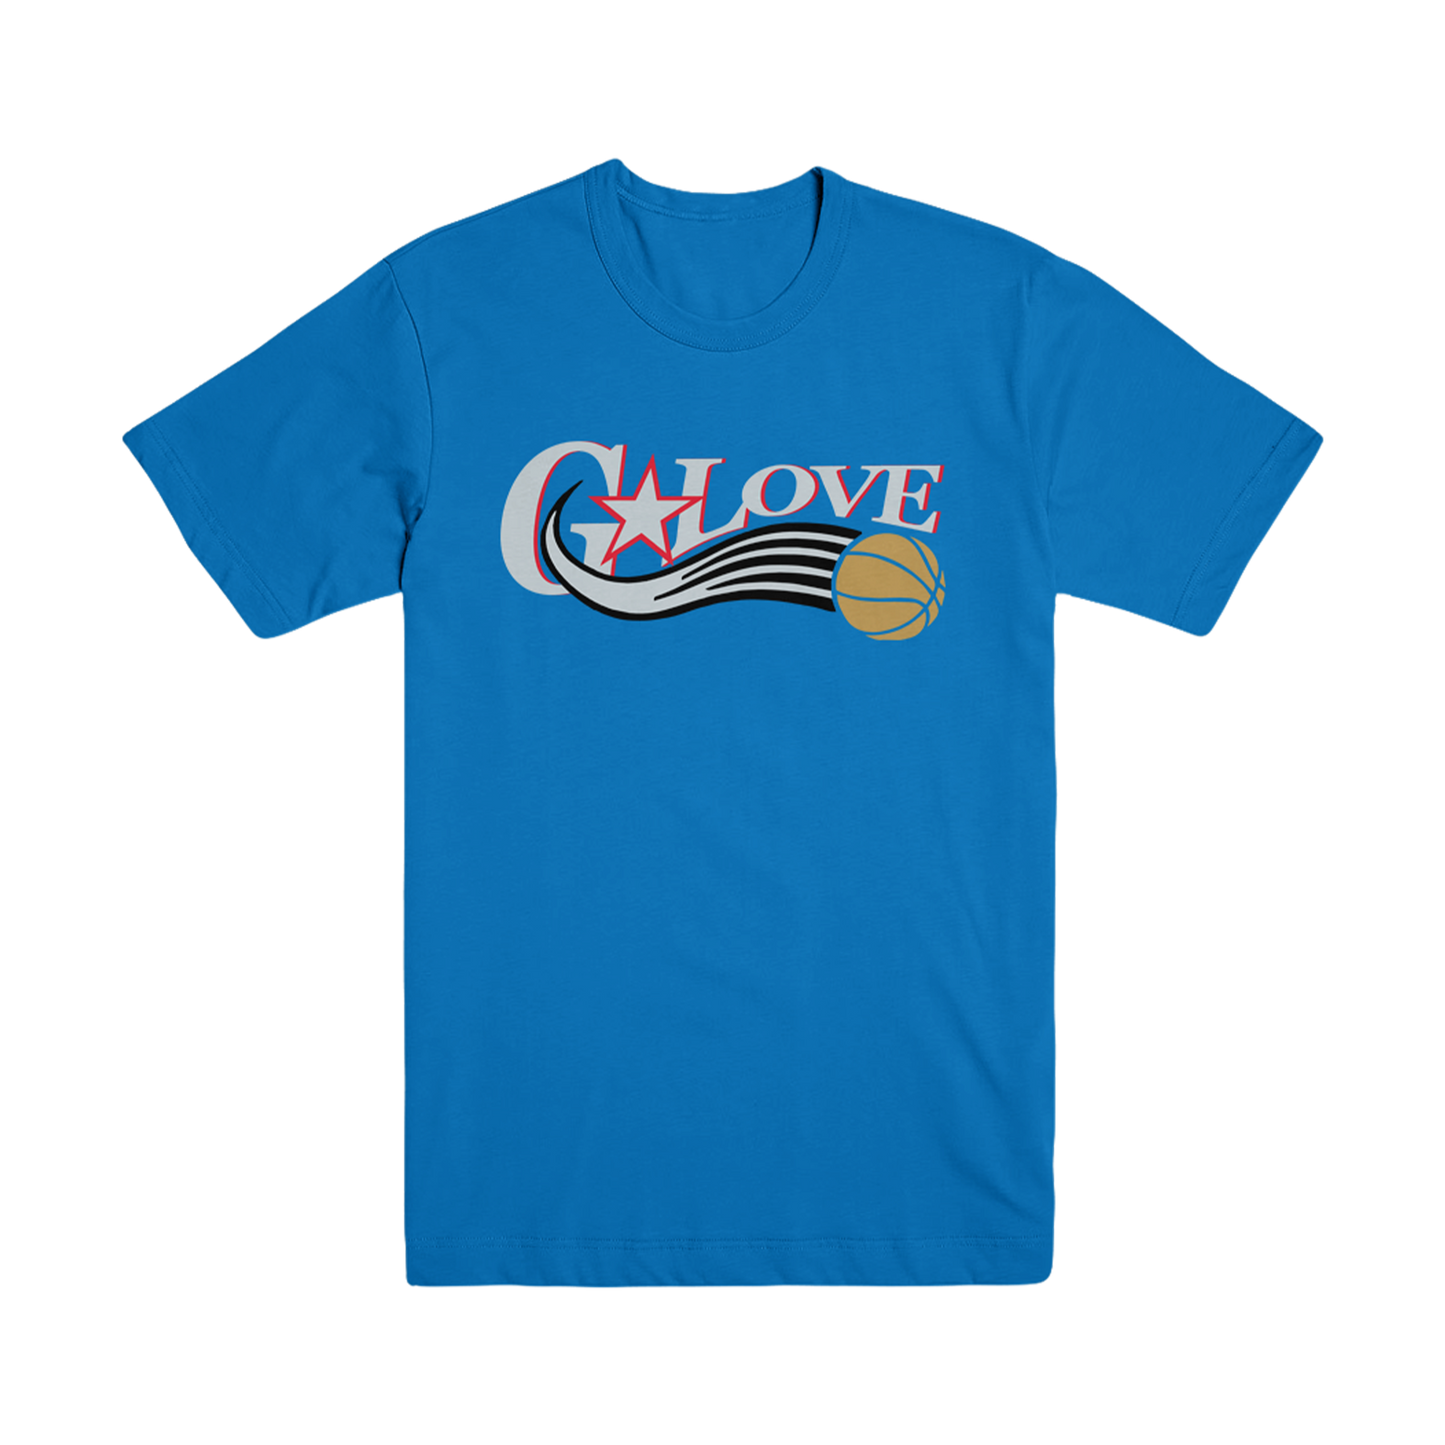 Sixers 76 Tee (Royal Blue)